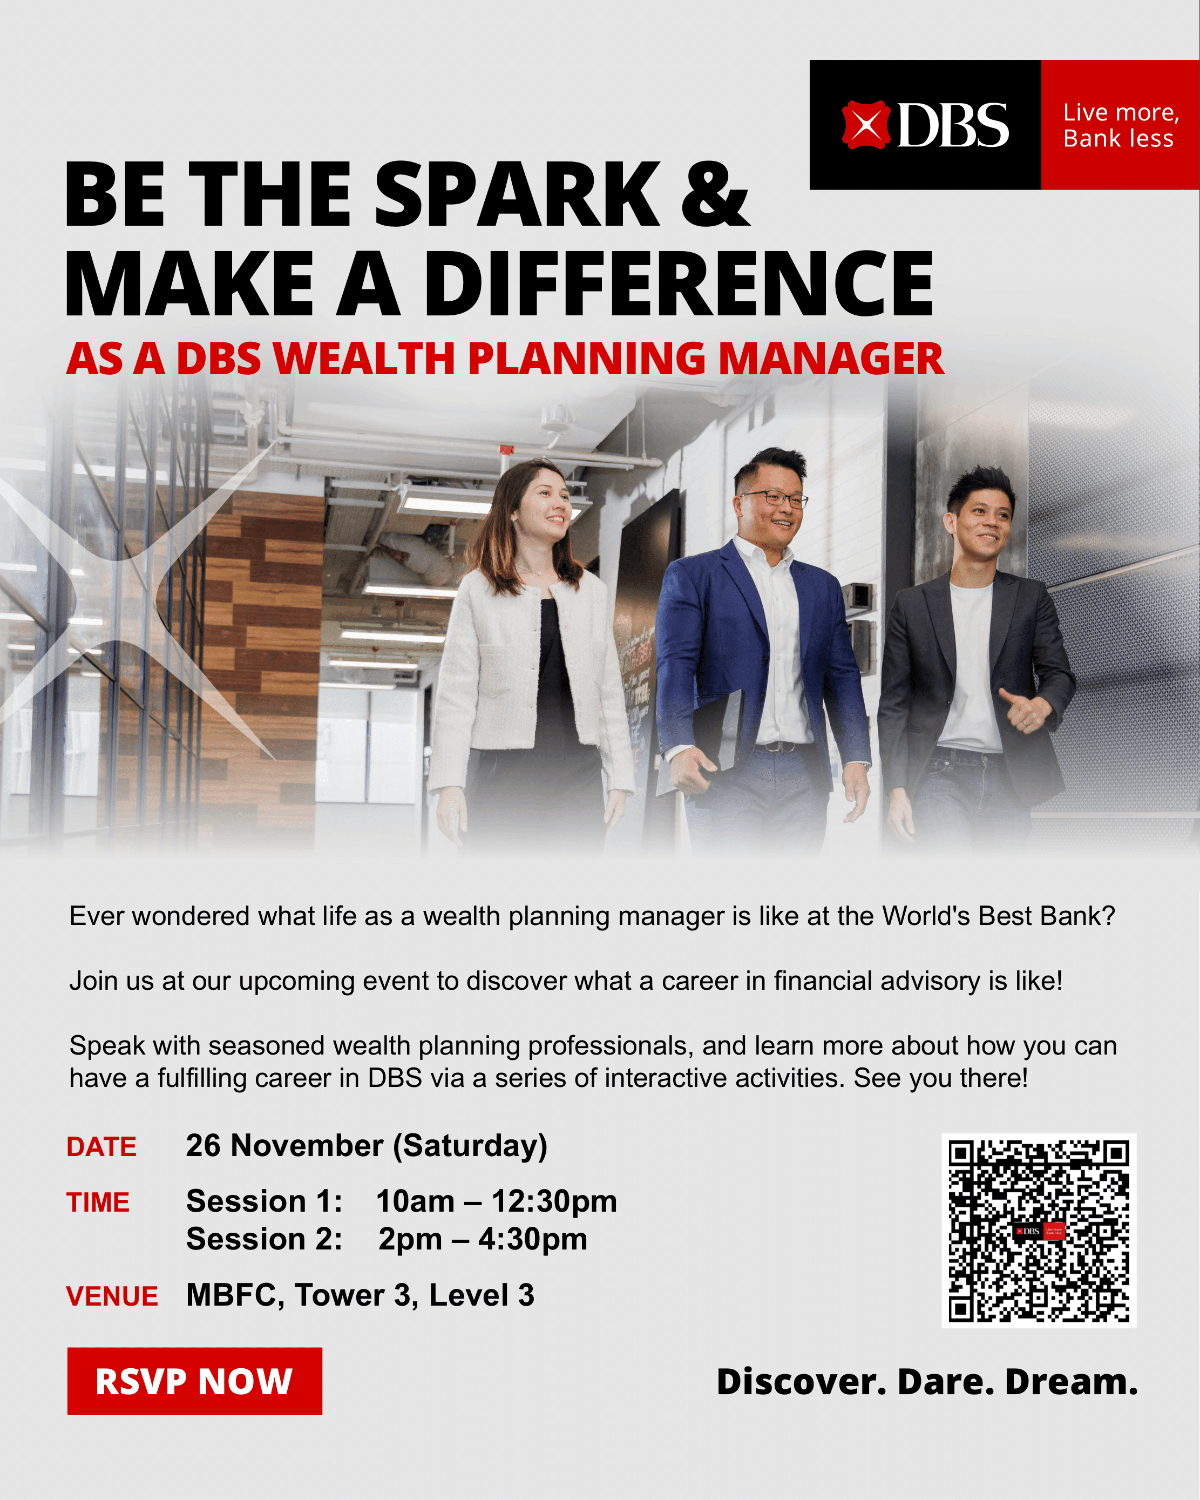 Be The Spark & Make A Difference, As A DBS Wealth Planning Manager EDM image